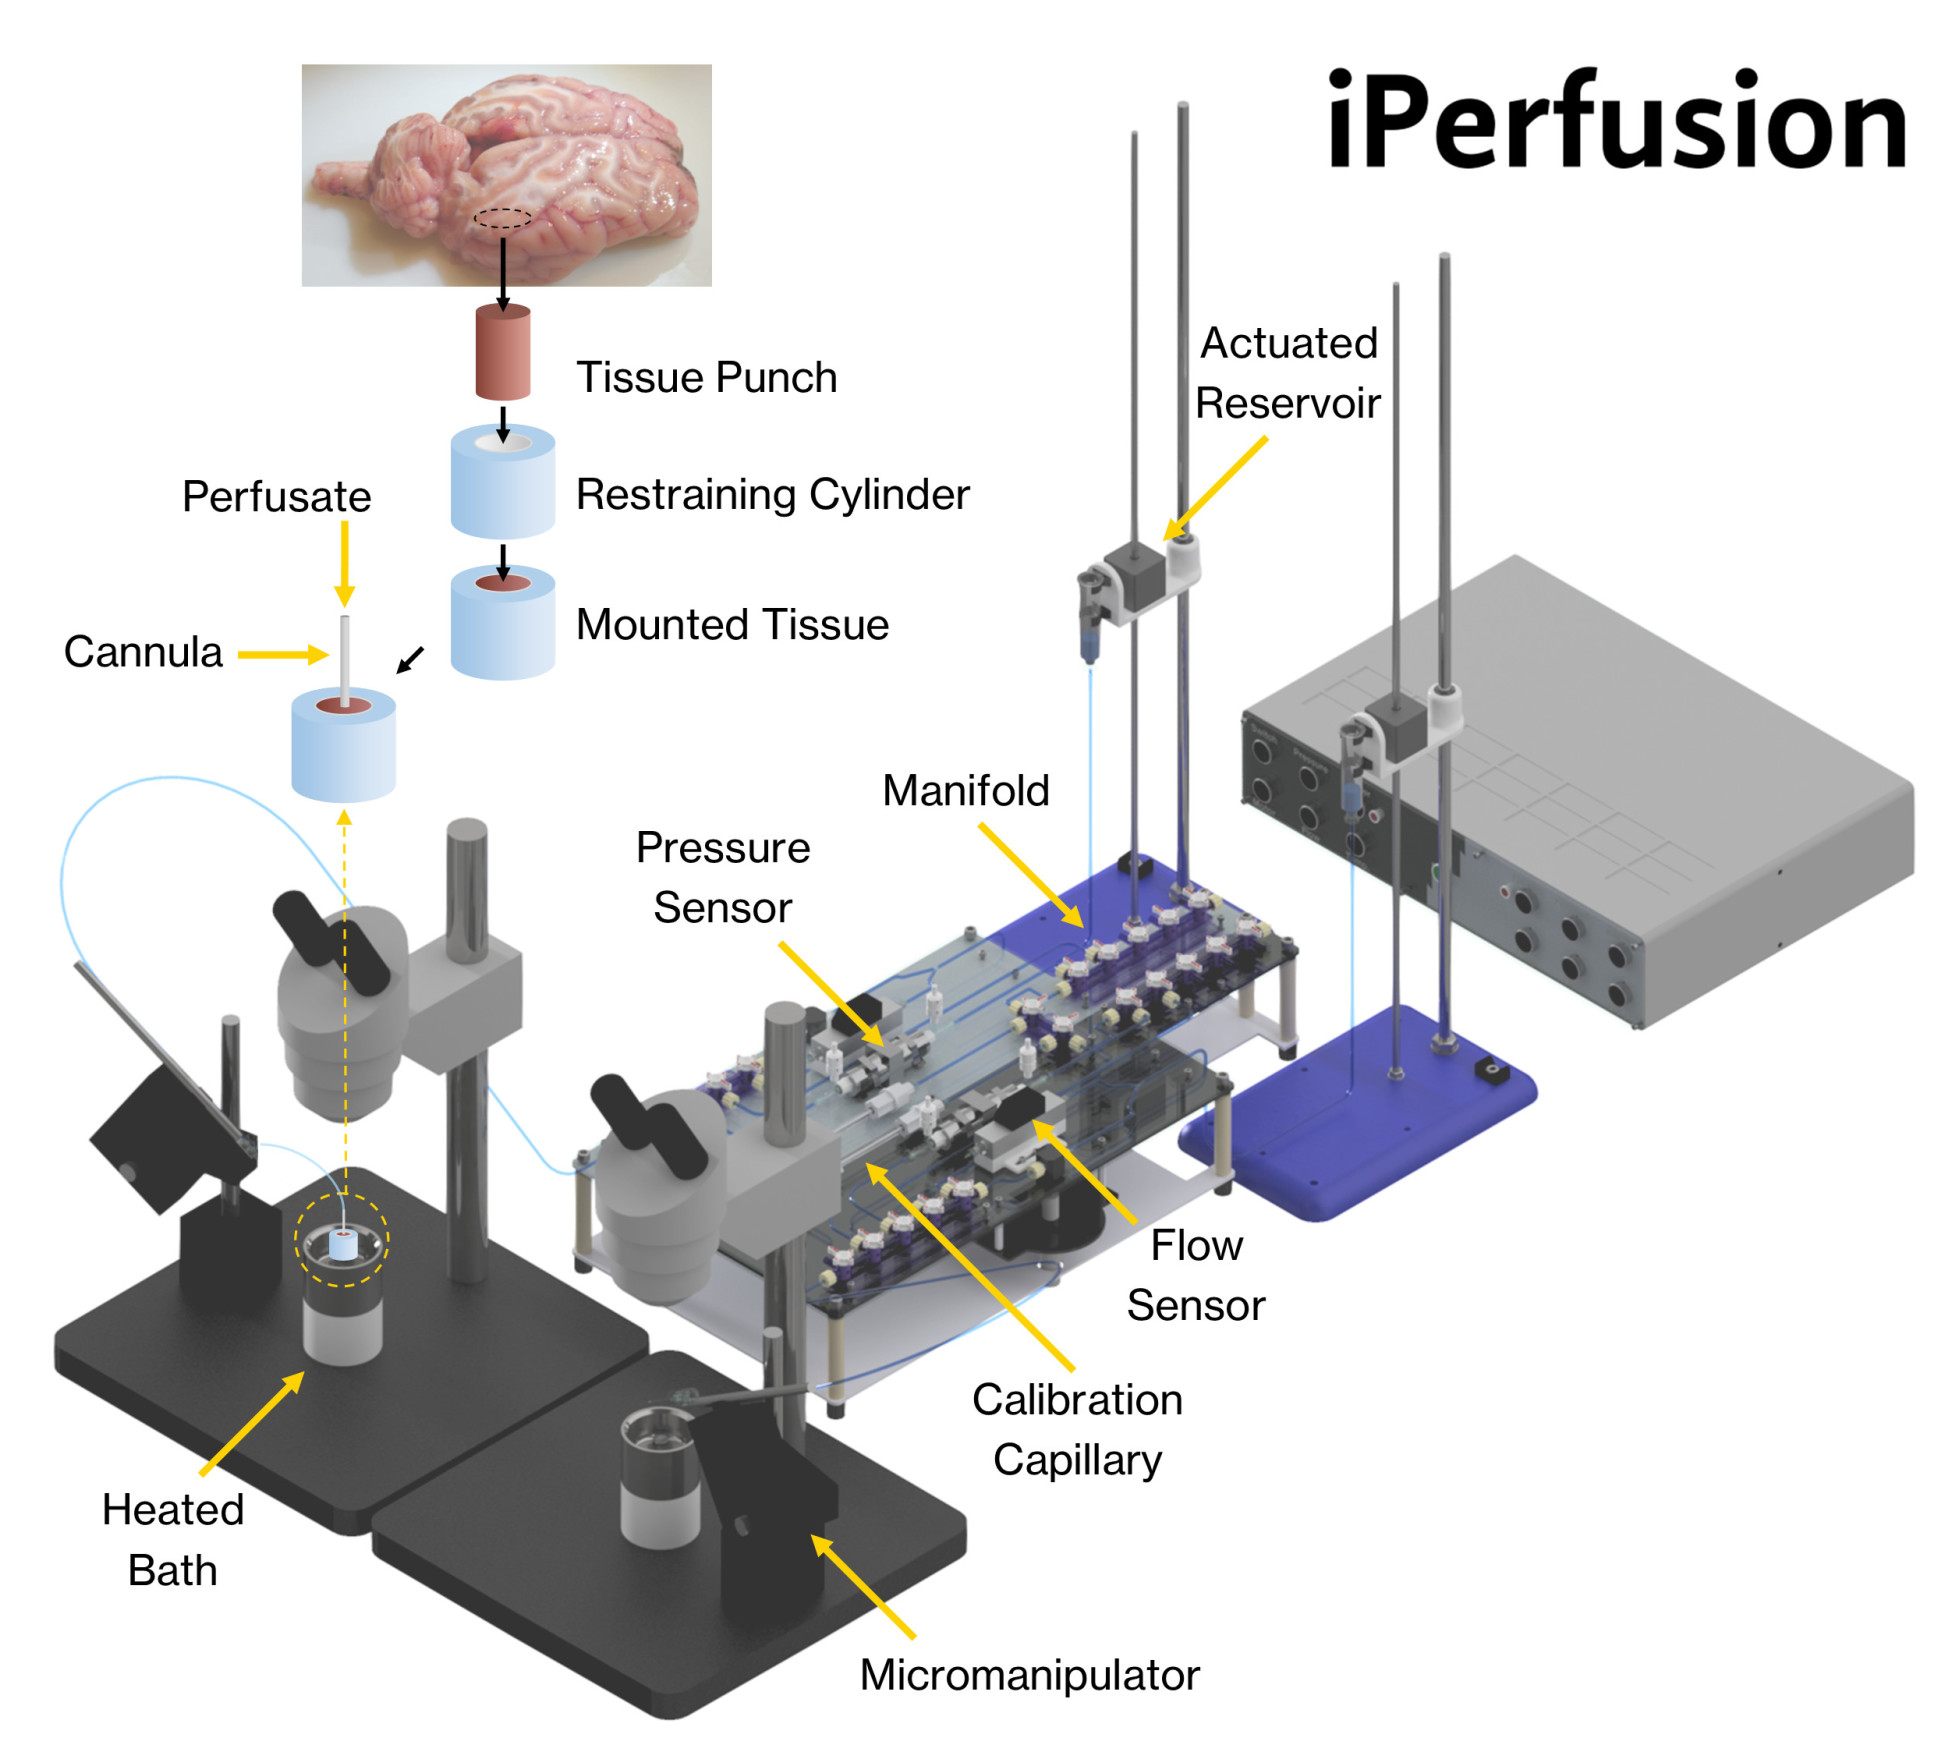 iPerfusion setup, detailing how the parts come together